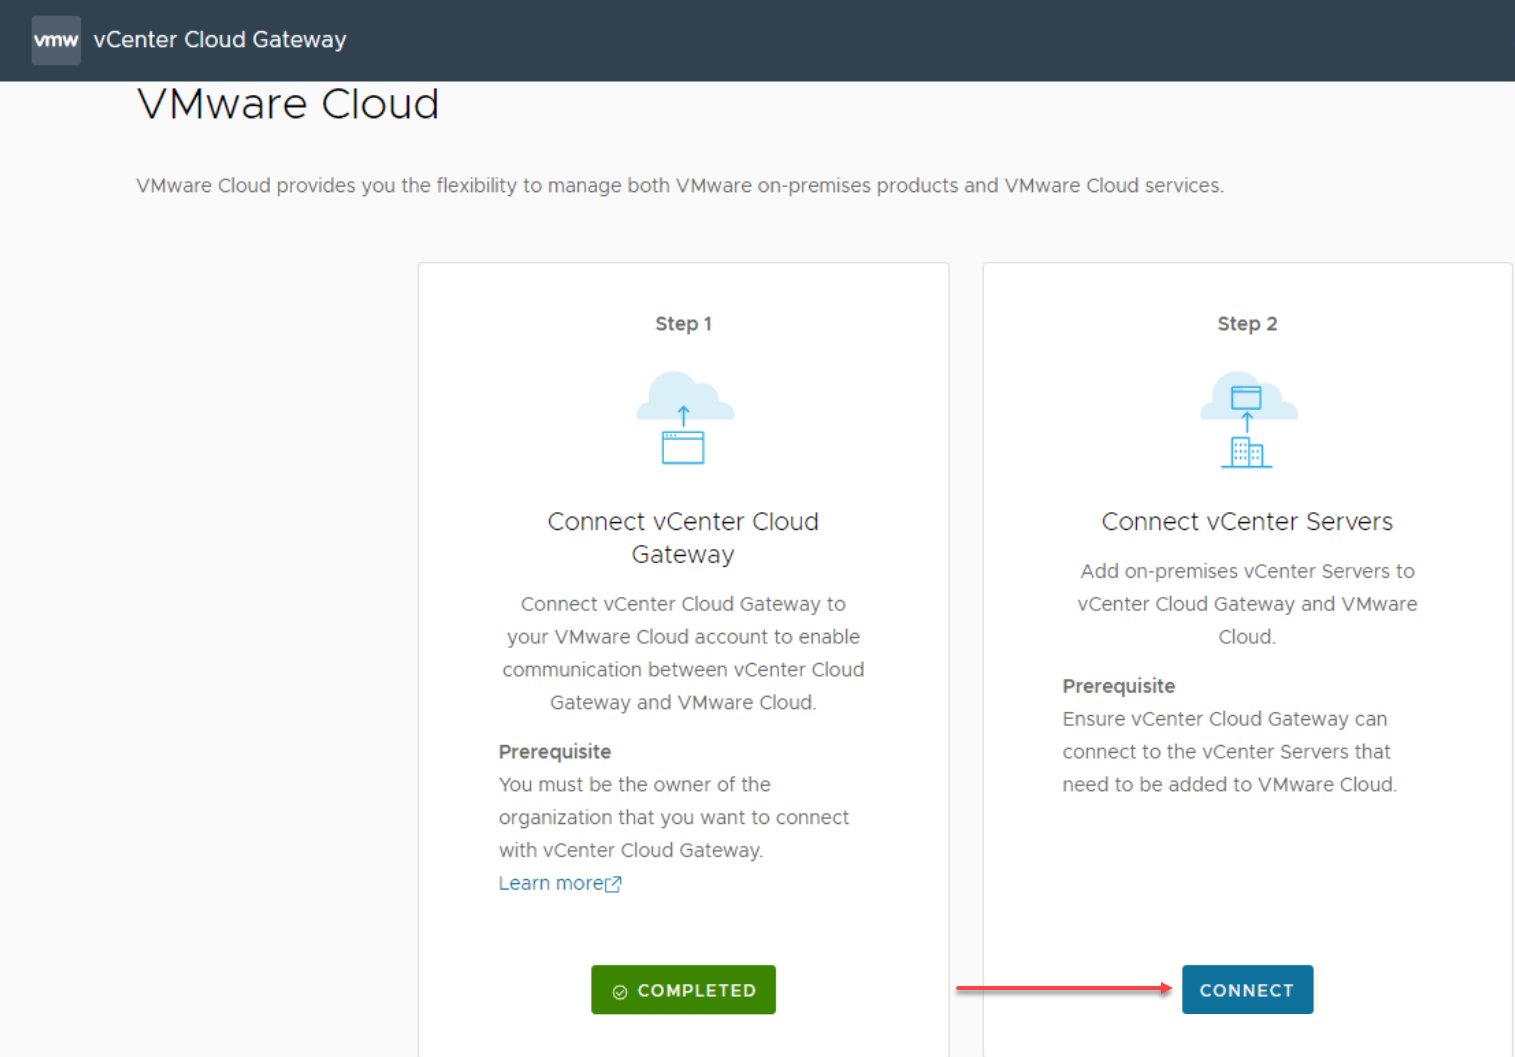 Connect vCenter Servers to vCenter Cloud Gateway and VMware Cloud